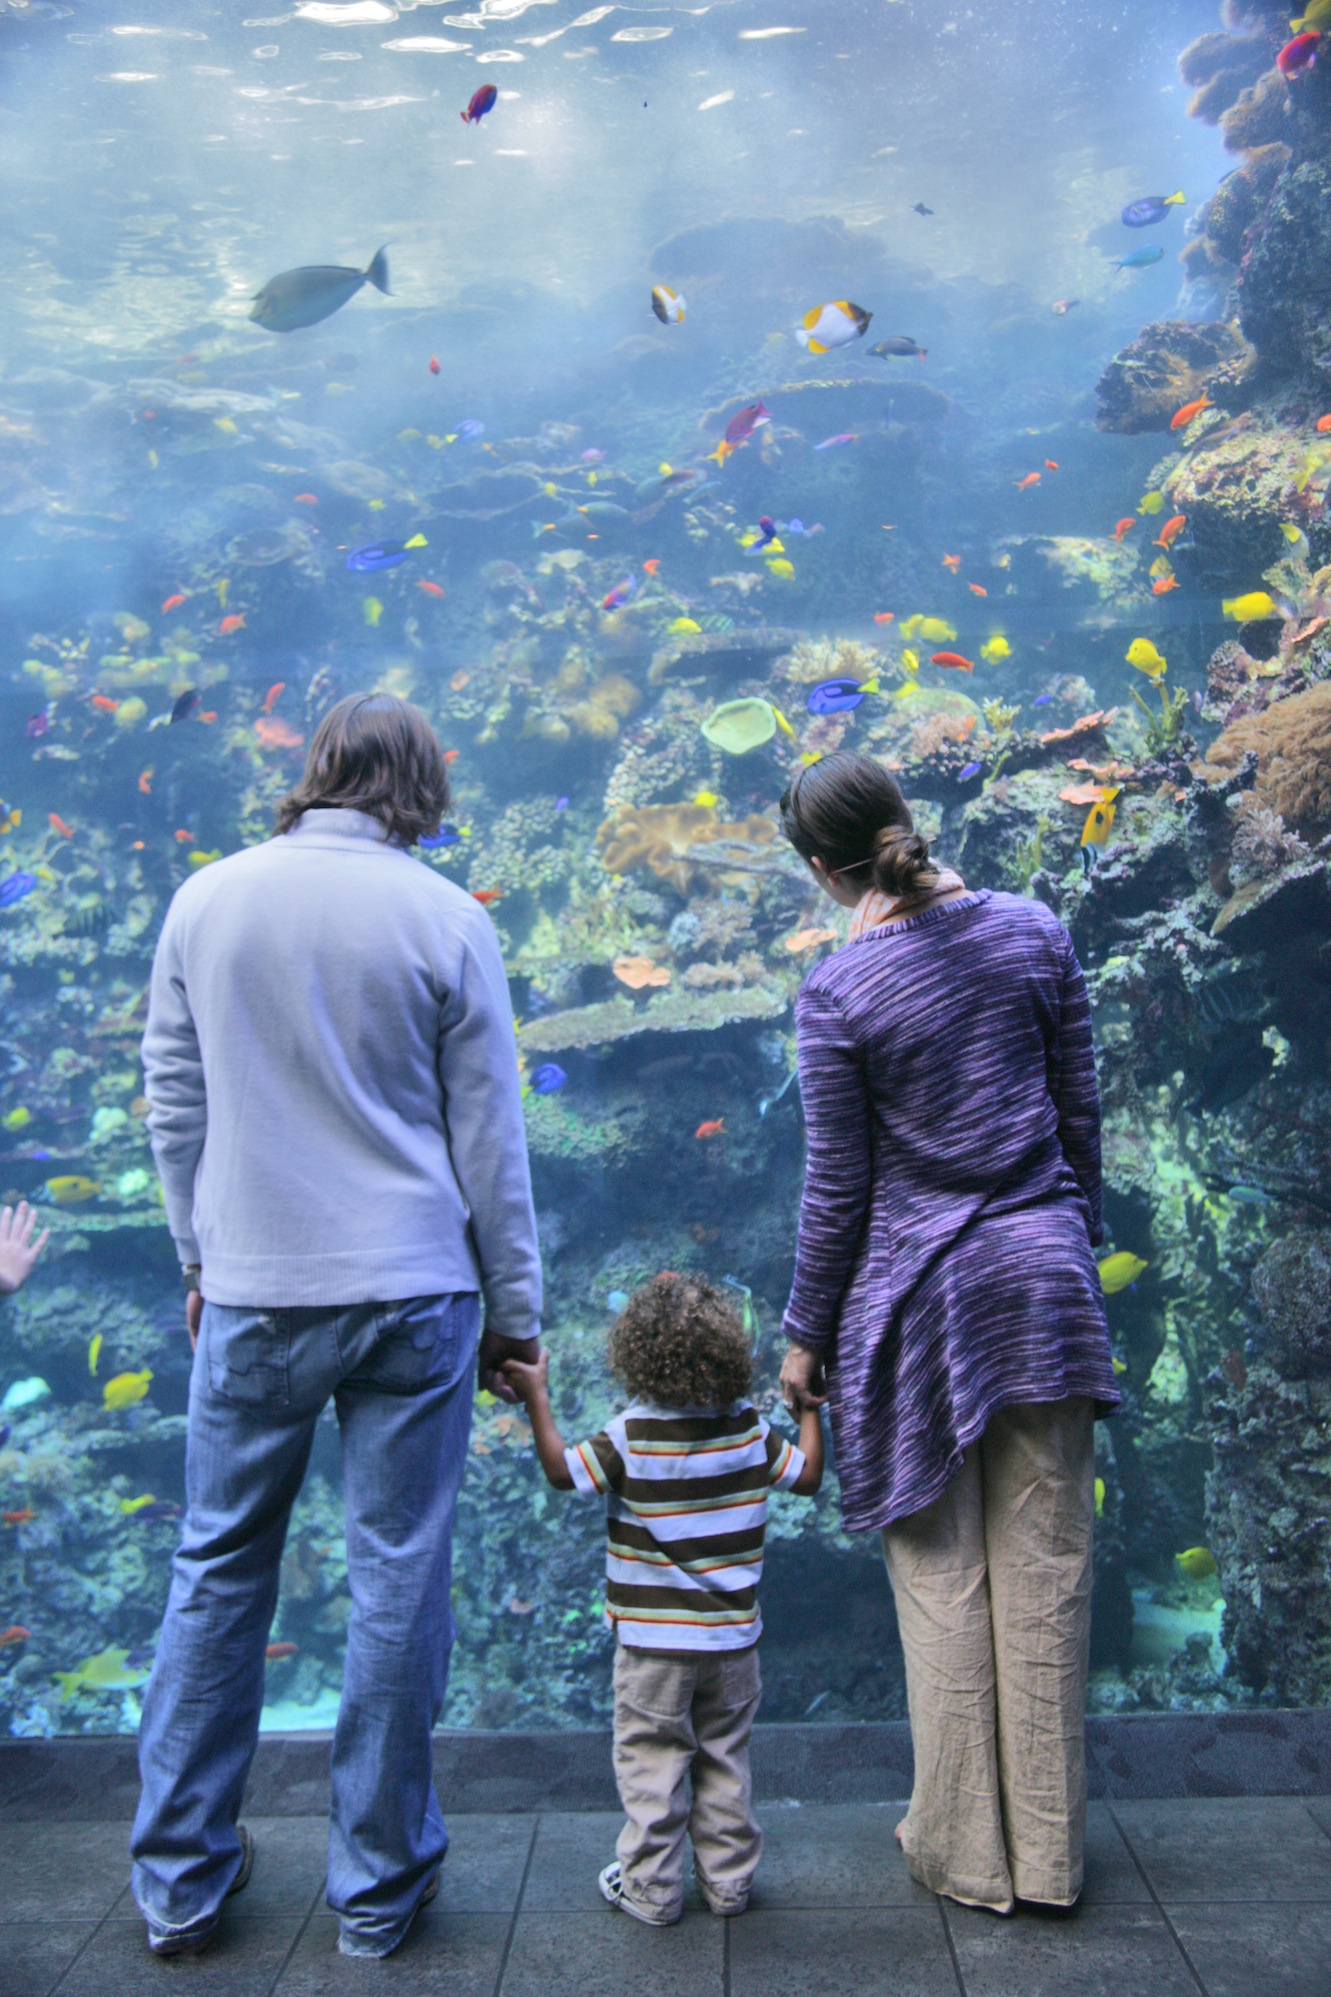 Spend the morning “under the sea” with 100,000 fish friends at the Georgia Aquarium.